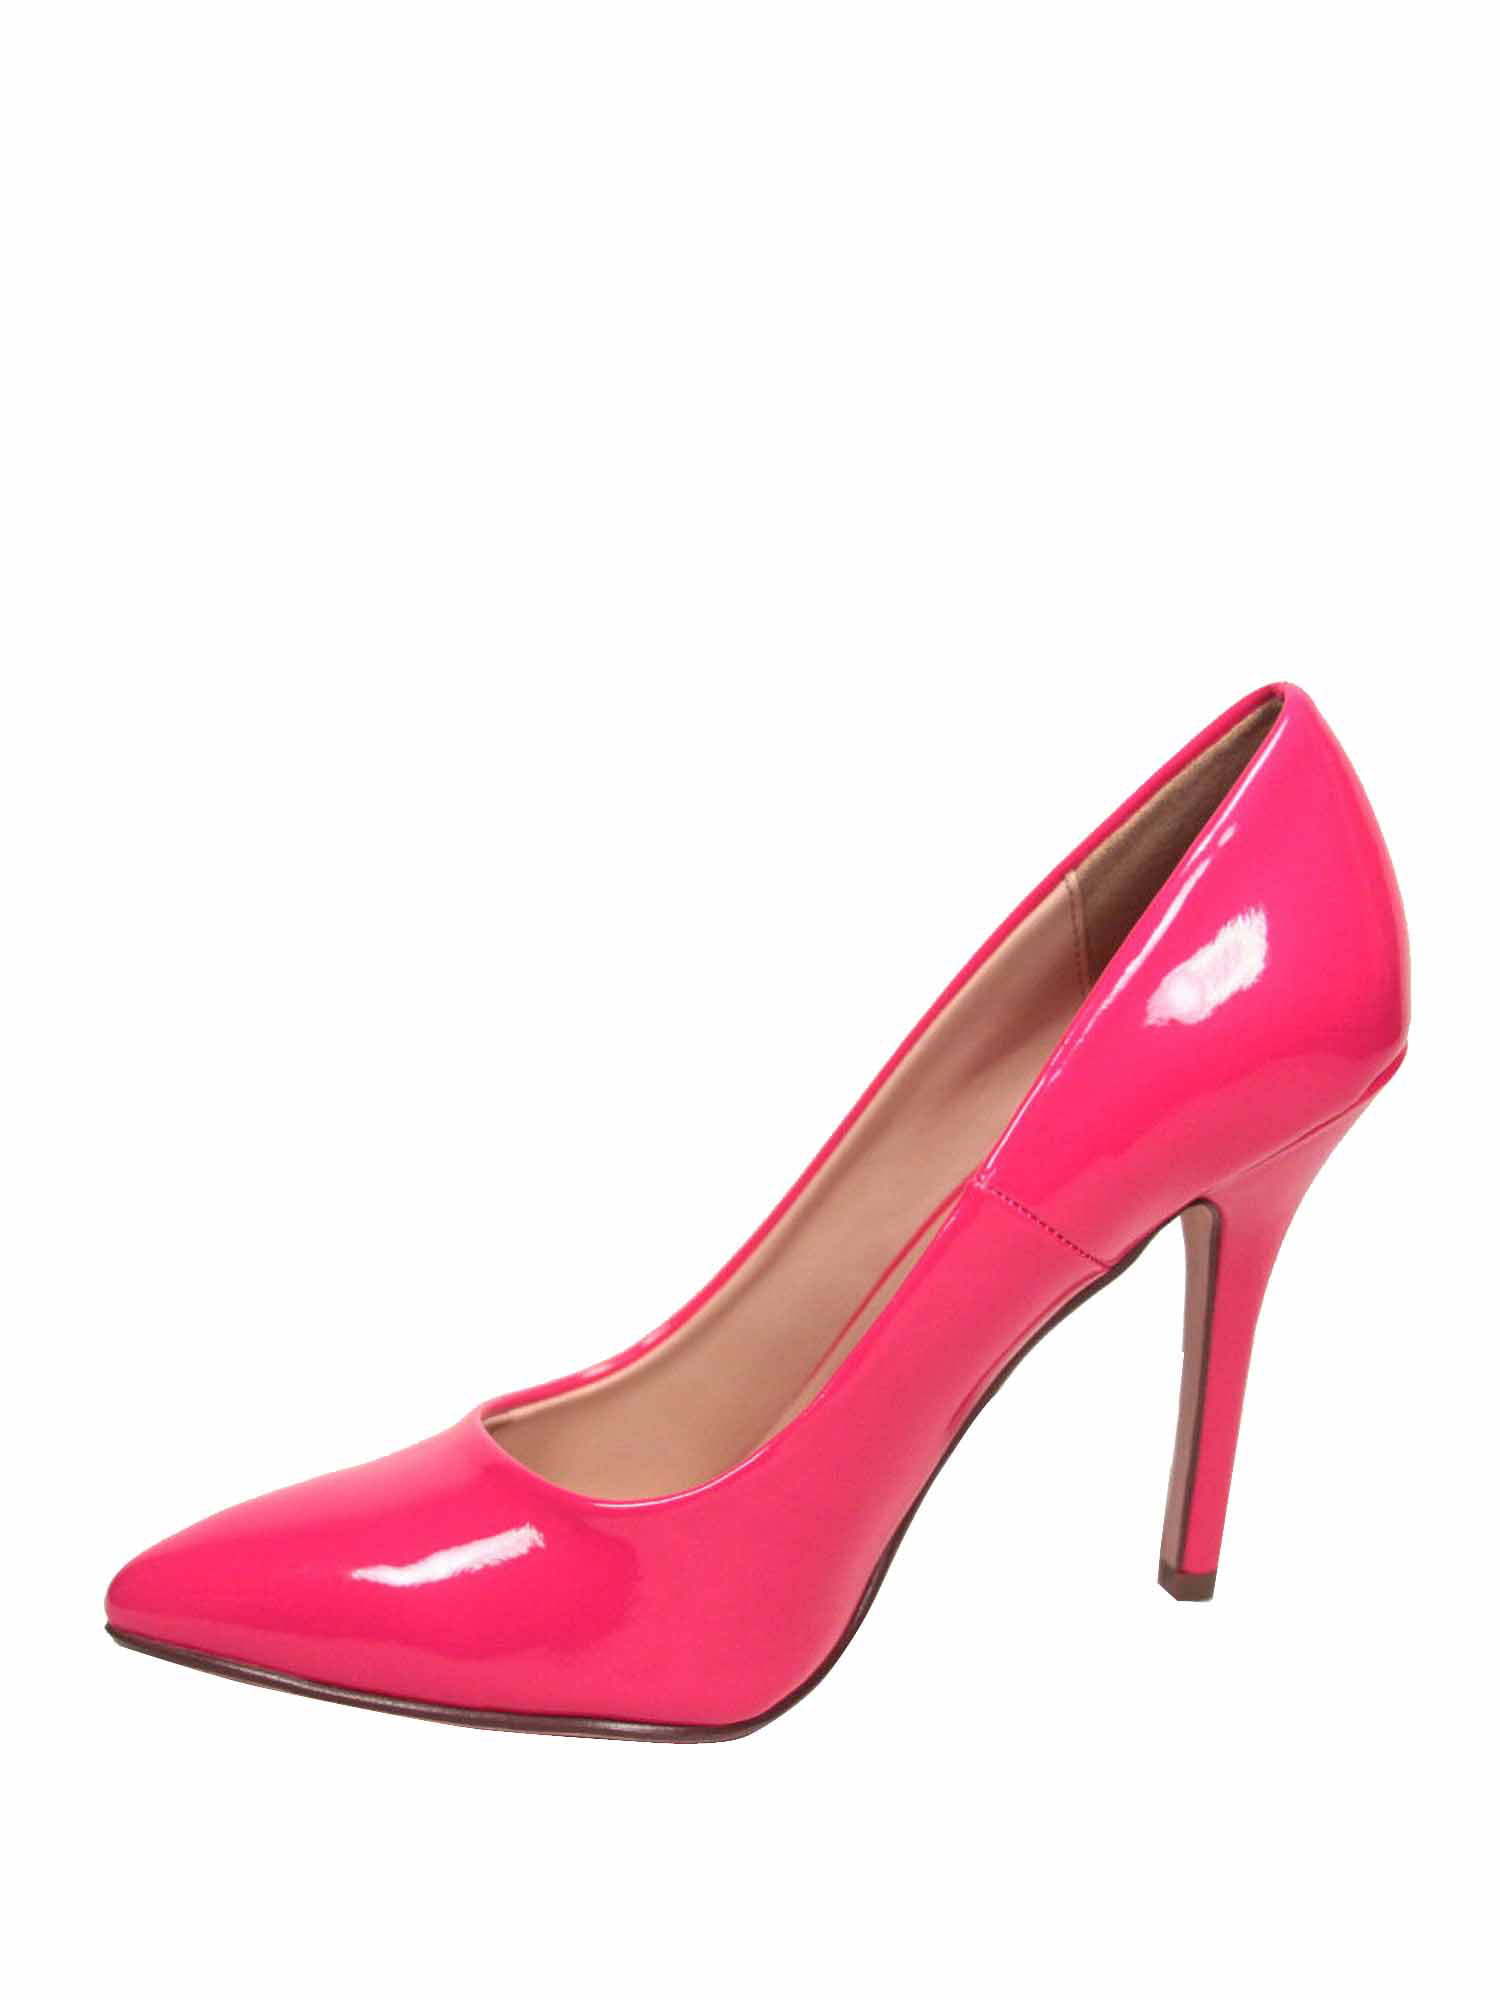 Buy Stylestry High Heels Solid Patent Pink Pumps for Women & Girls /UK4 at  Amazon.in